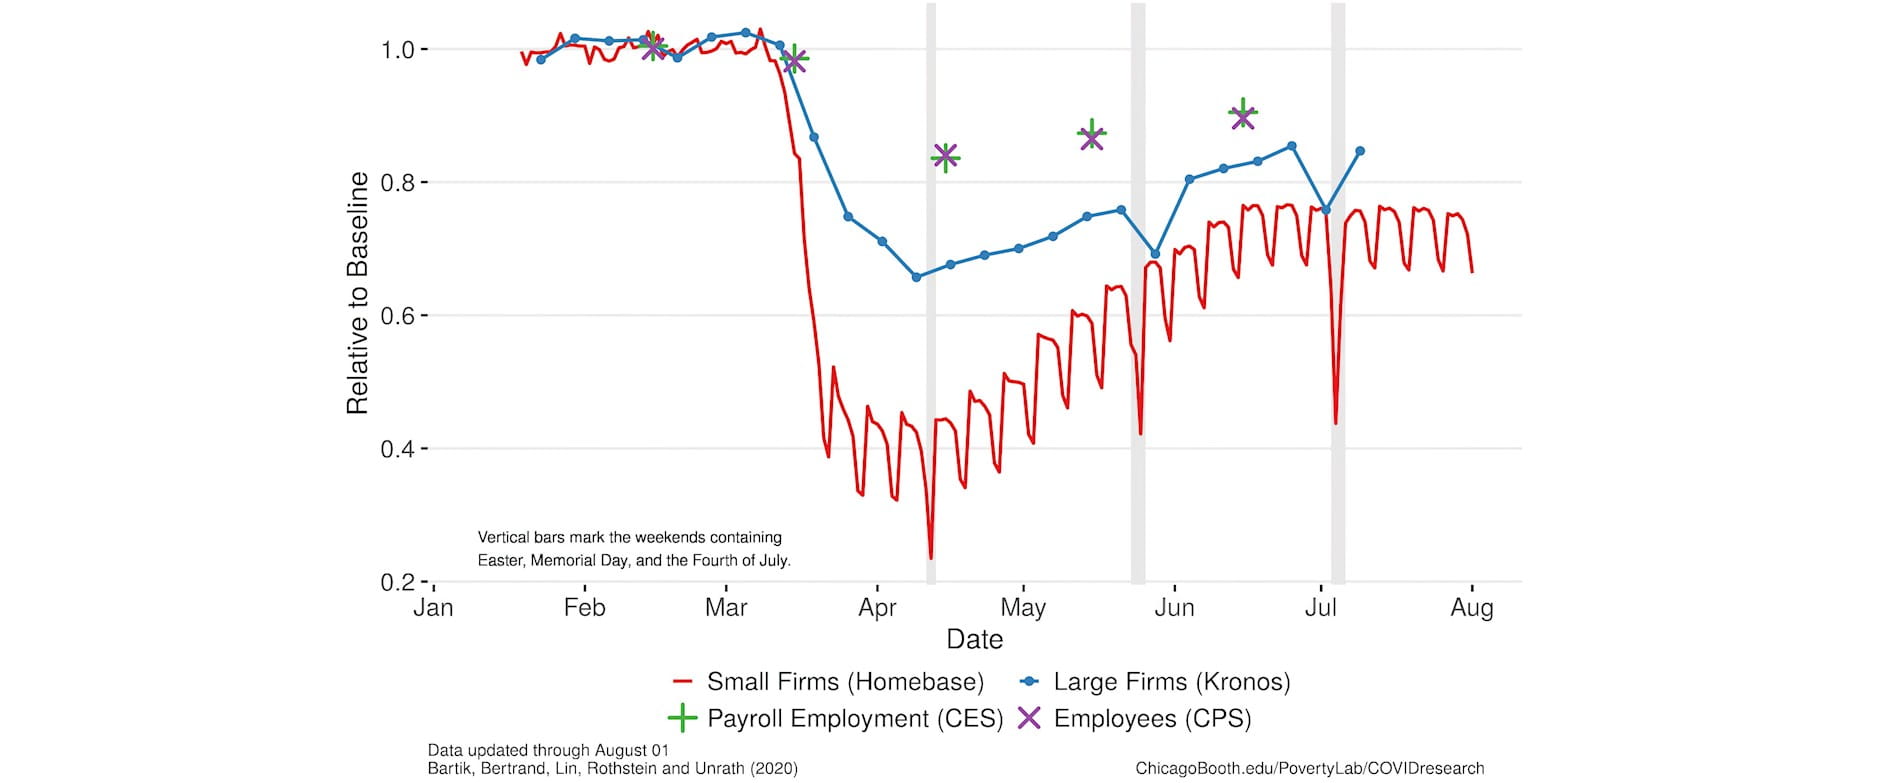 Line graph showing employment trends beginning in January